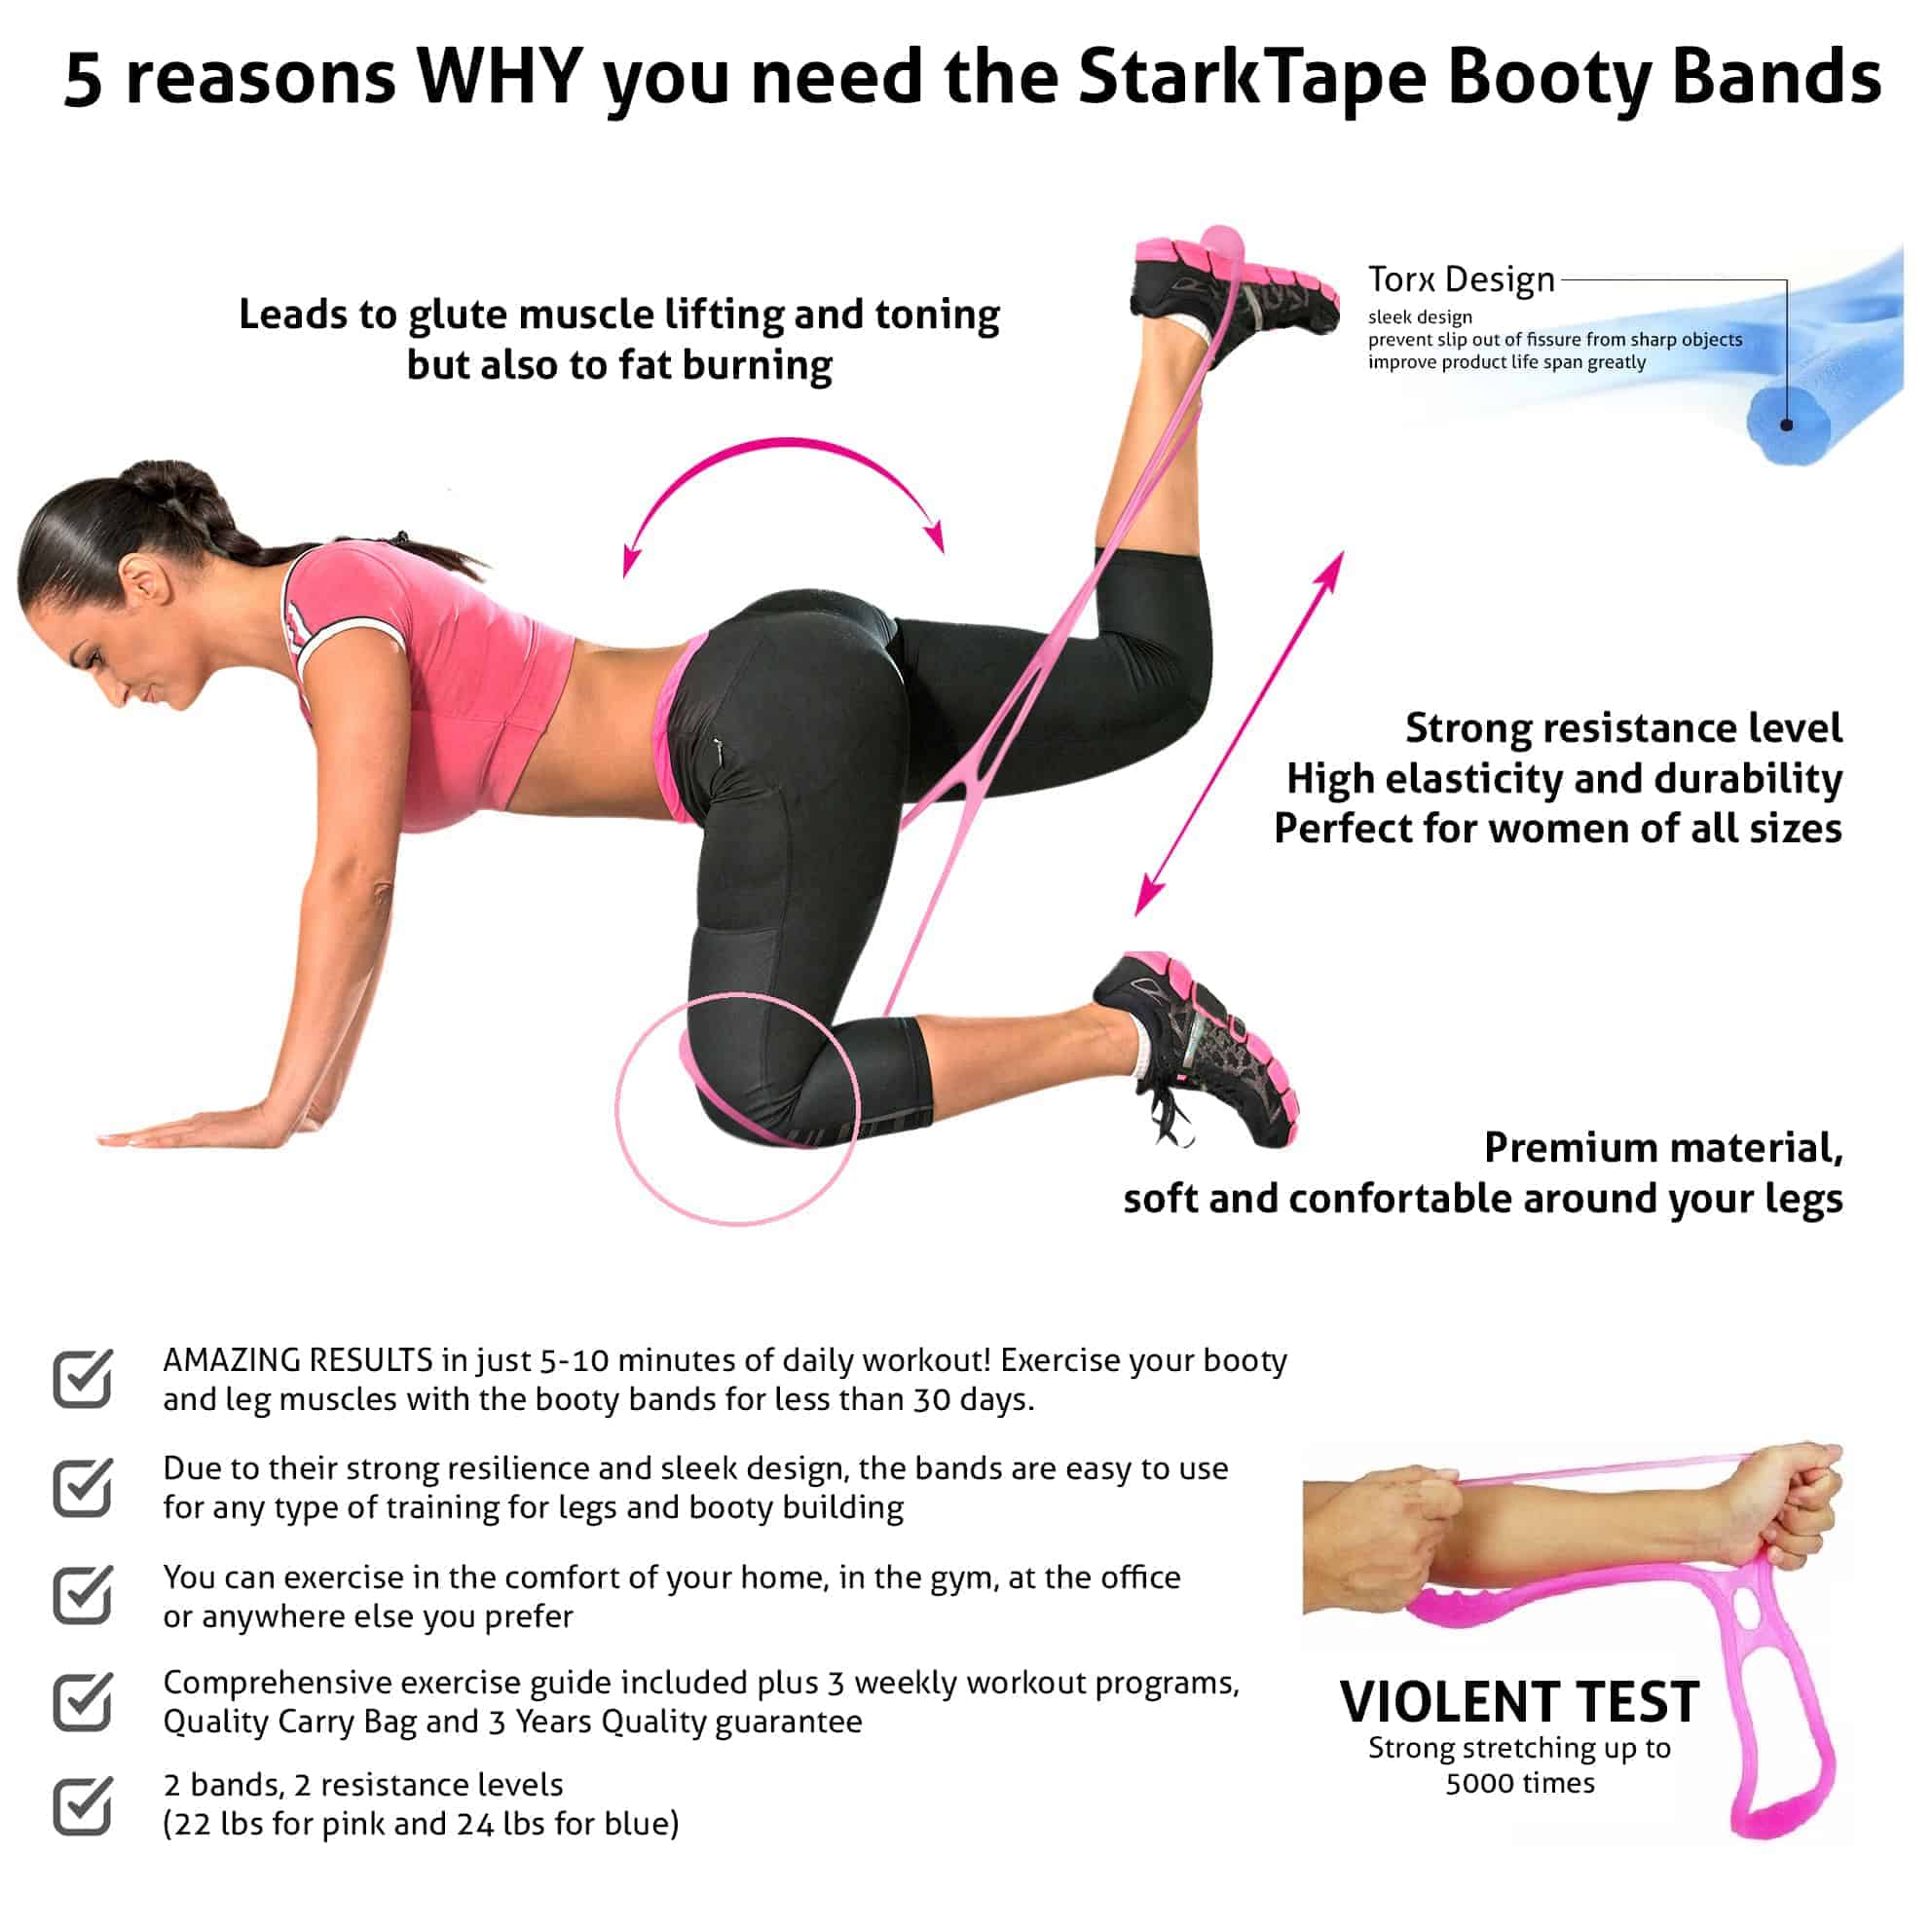 What Are Booty Bands And Why Should I Use Them?